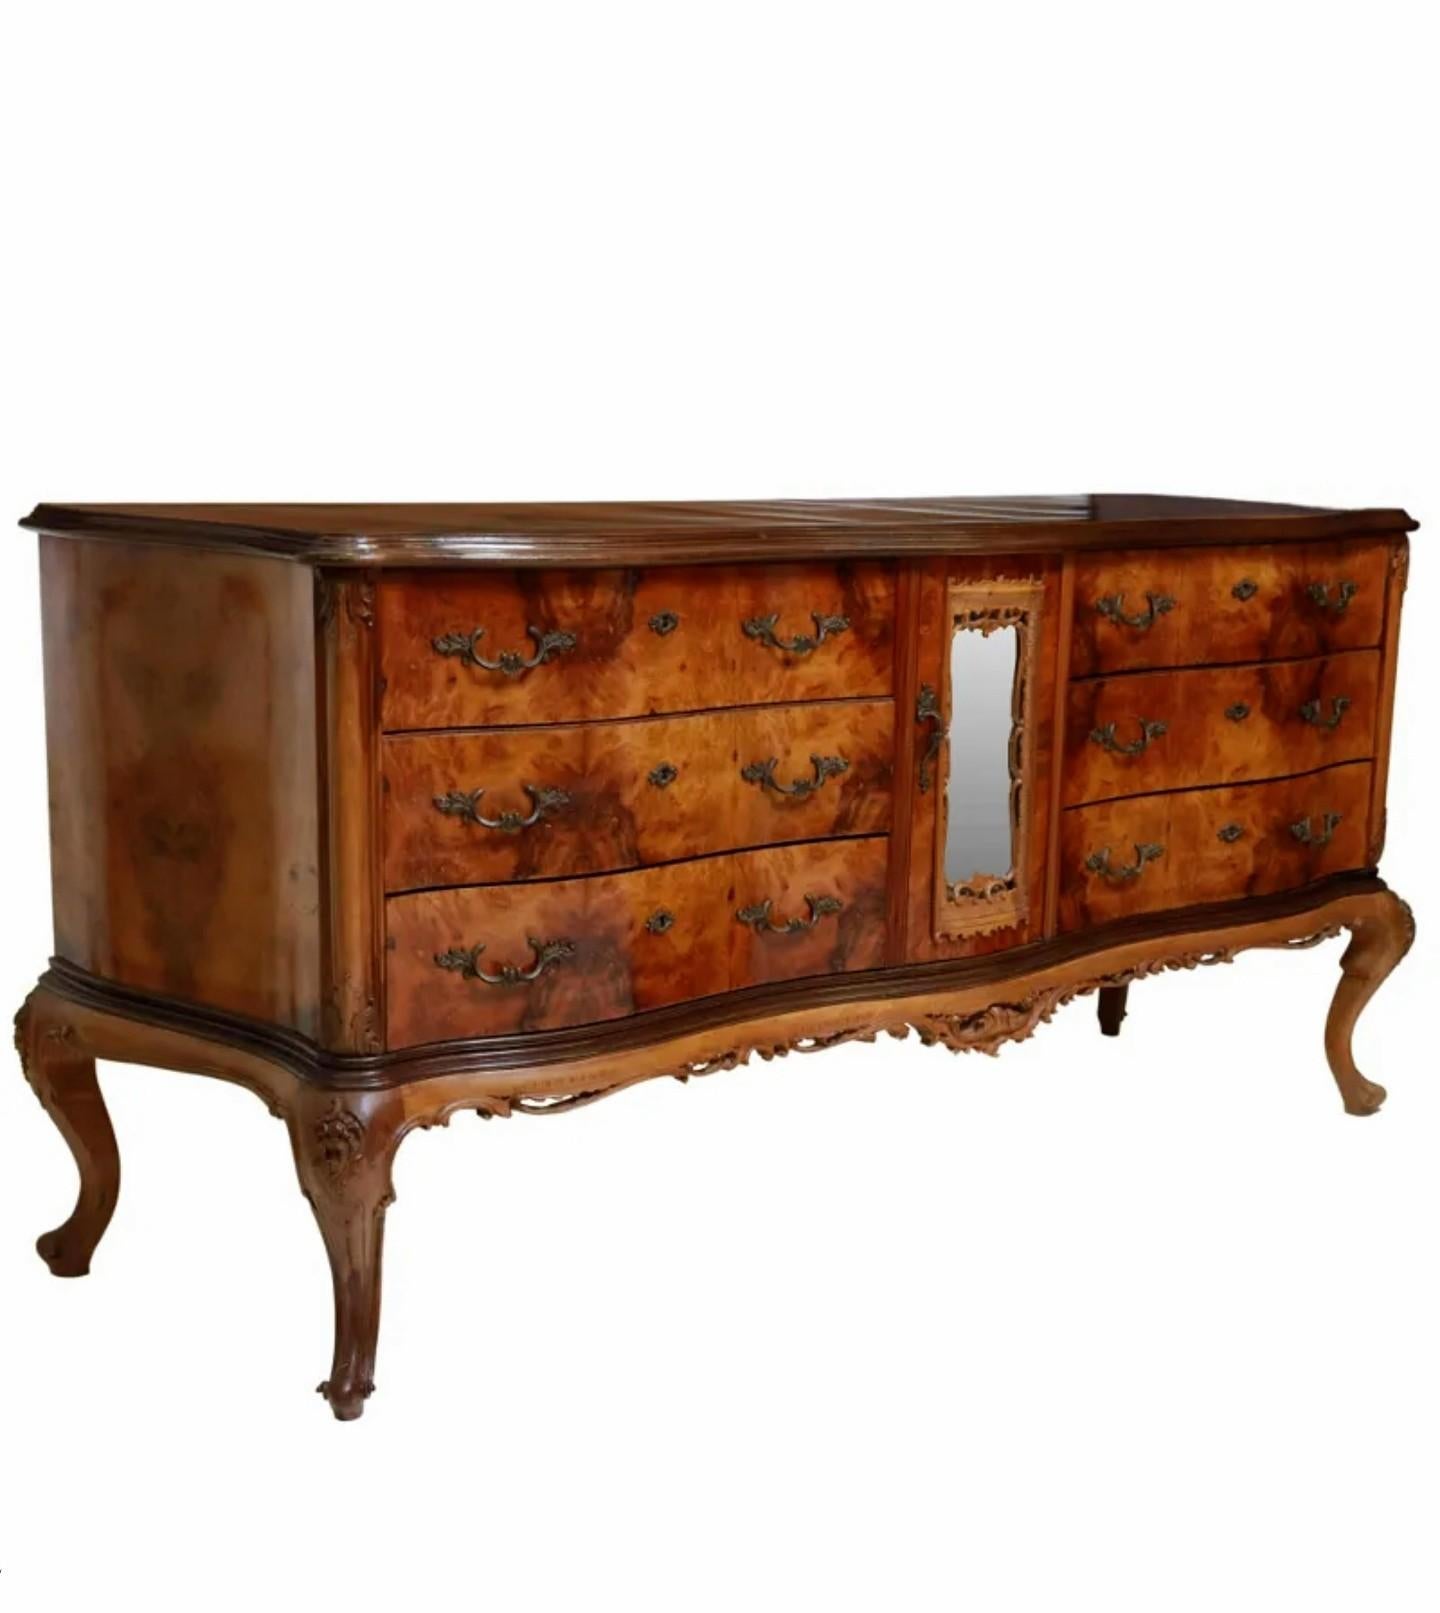 Hand-Carved Venetian Baroque Patchwork Burled Walnut Sideboard Buffet For Sale